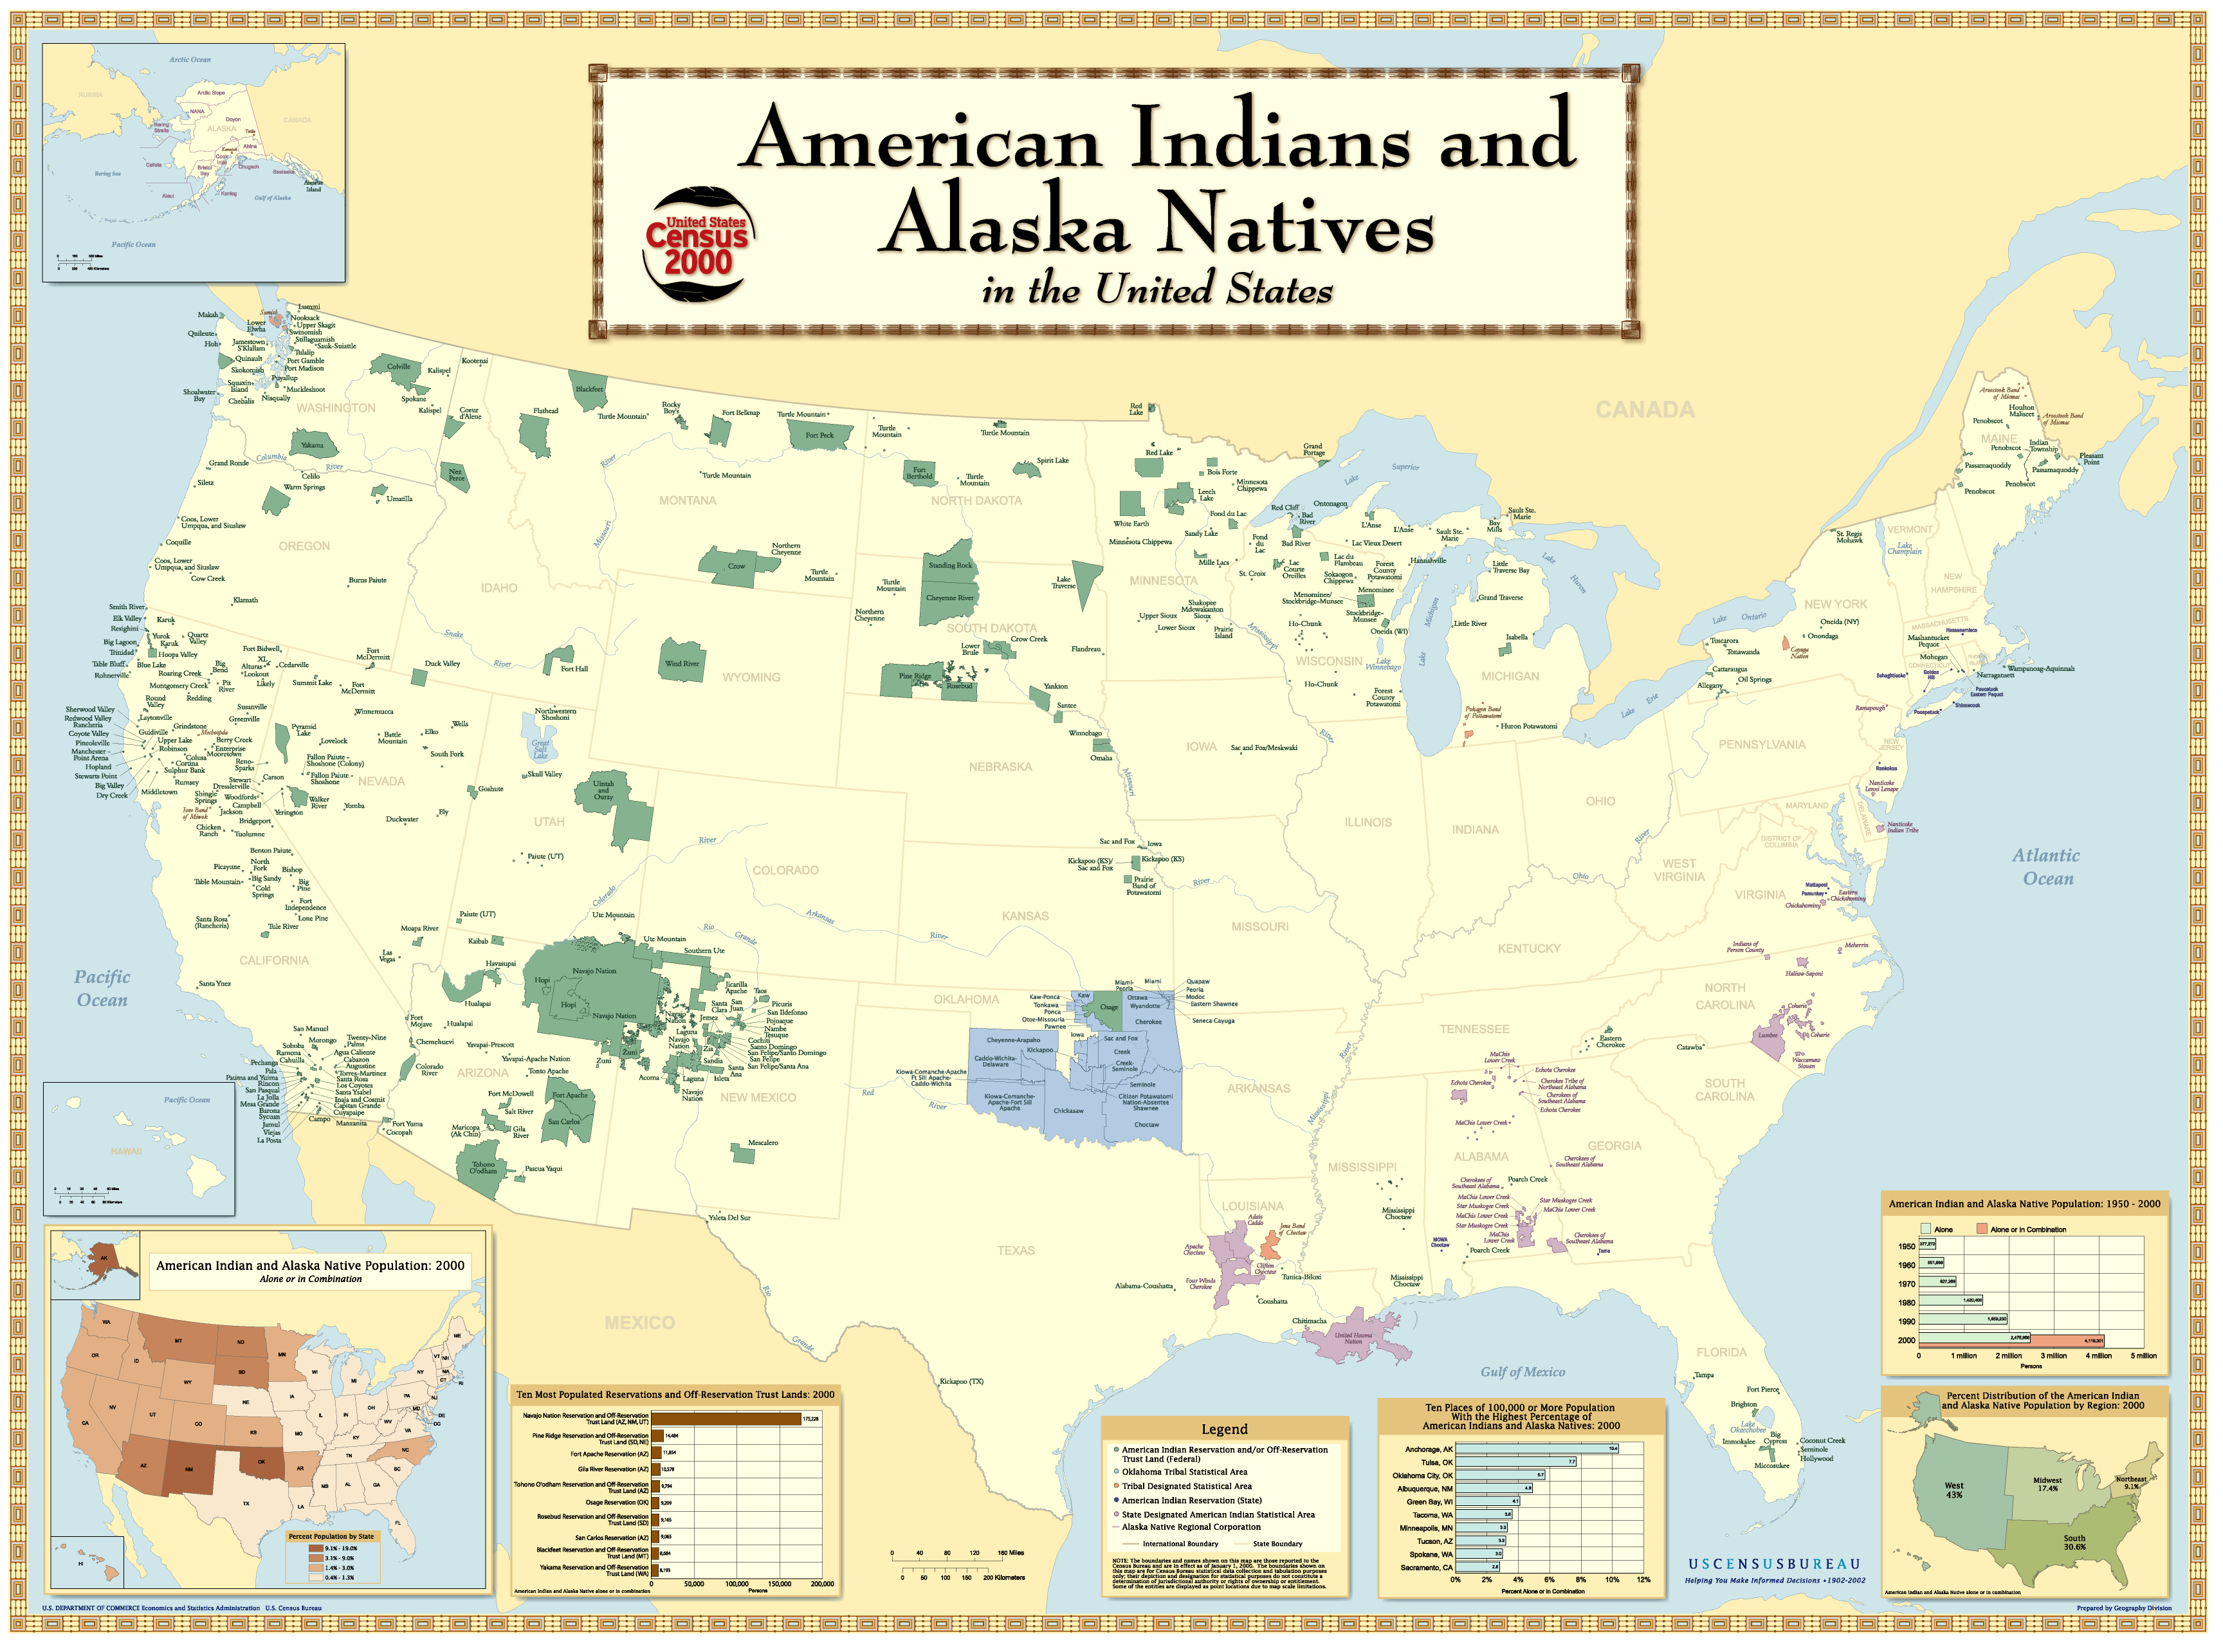 Large US Census Map of American Indian Lands